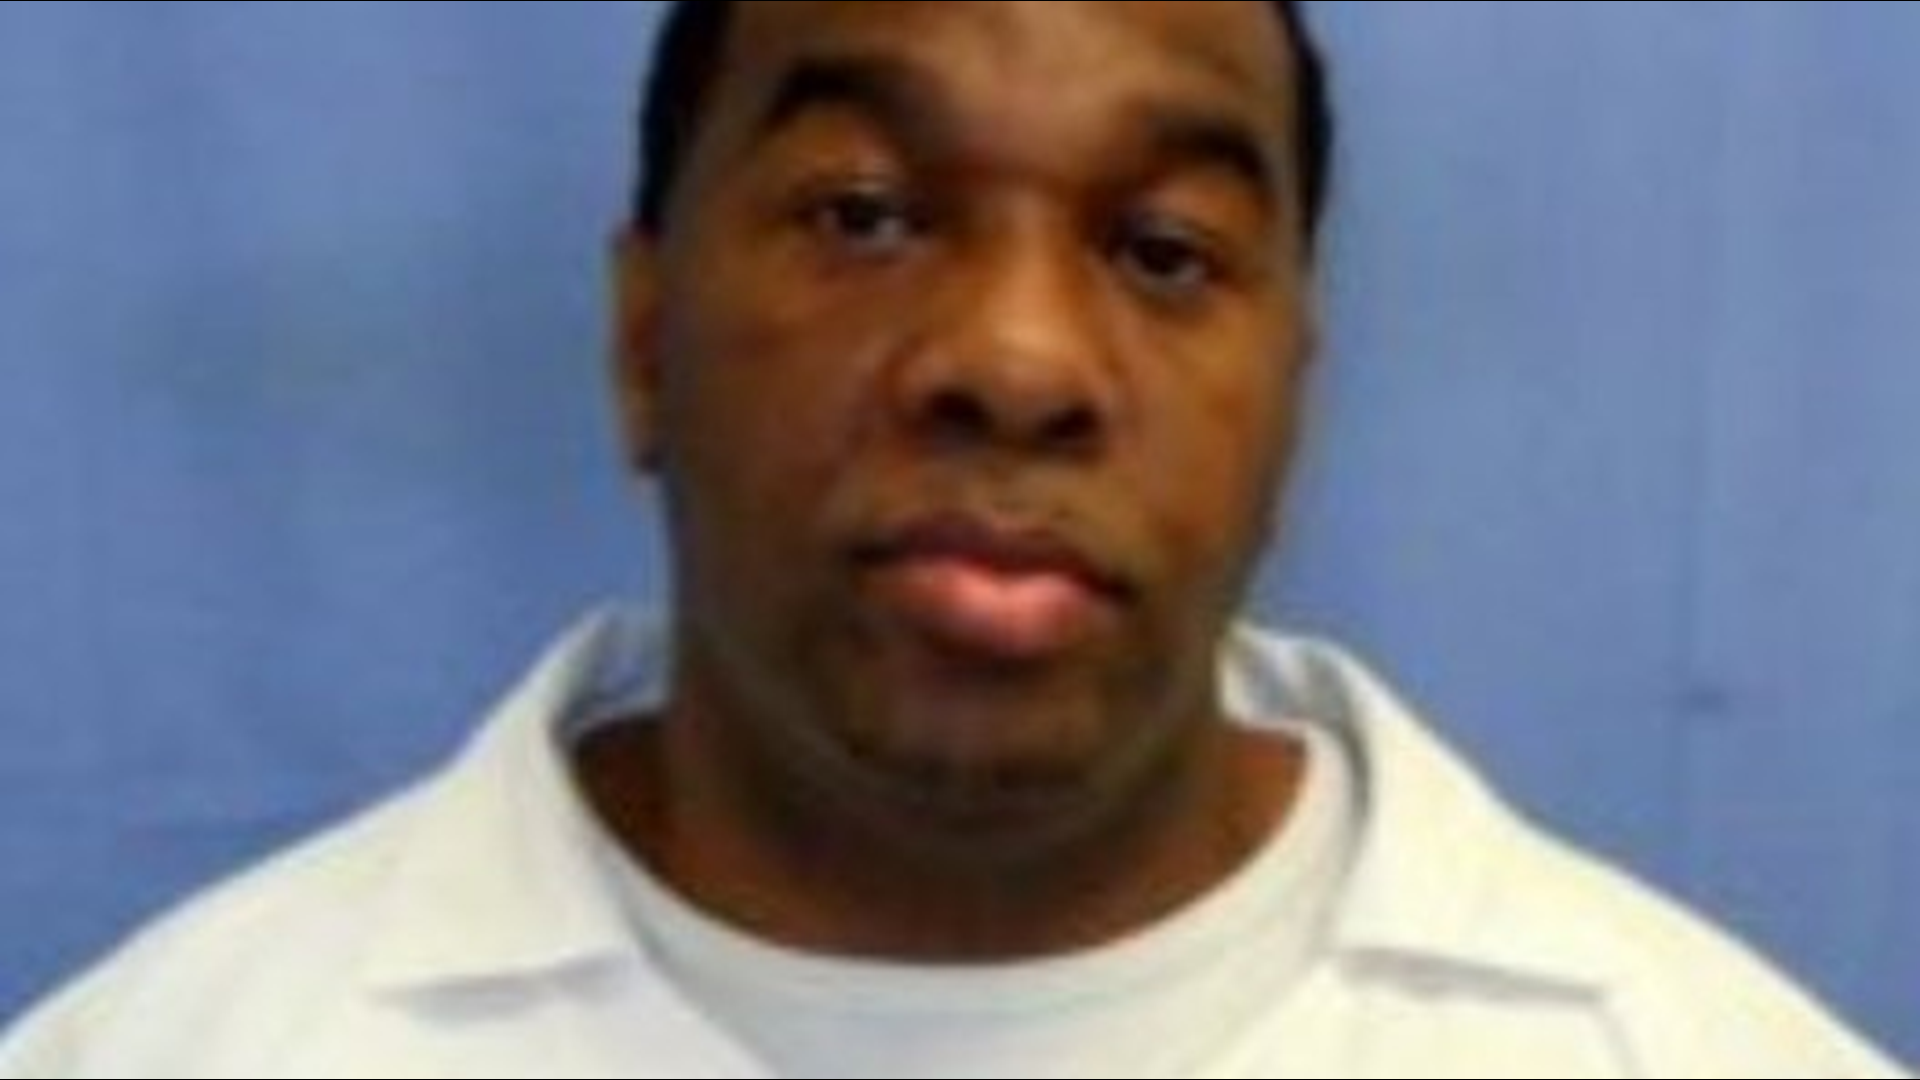 Arkansas man released from prison after 26 years due to overturned